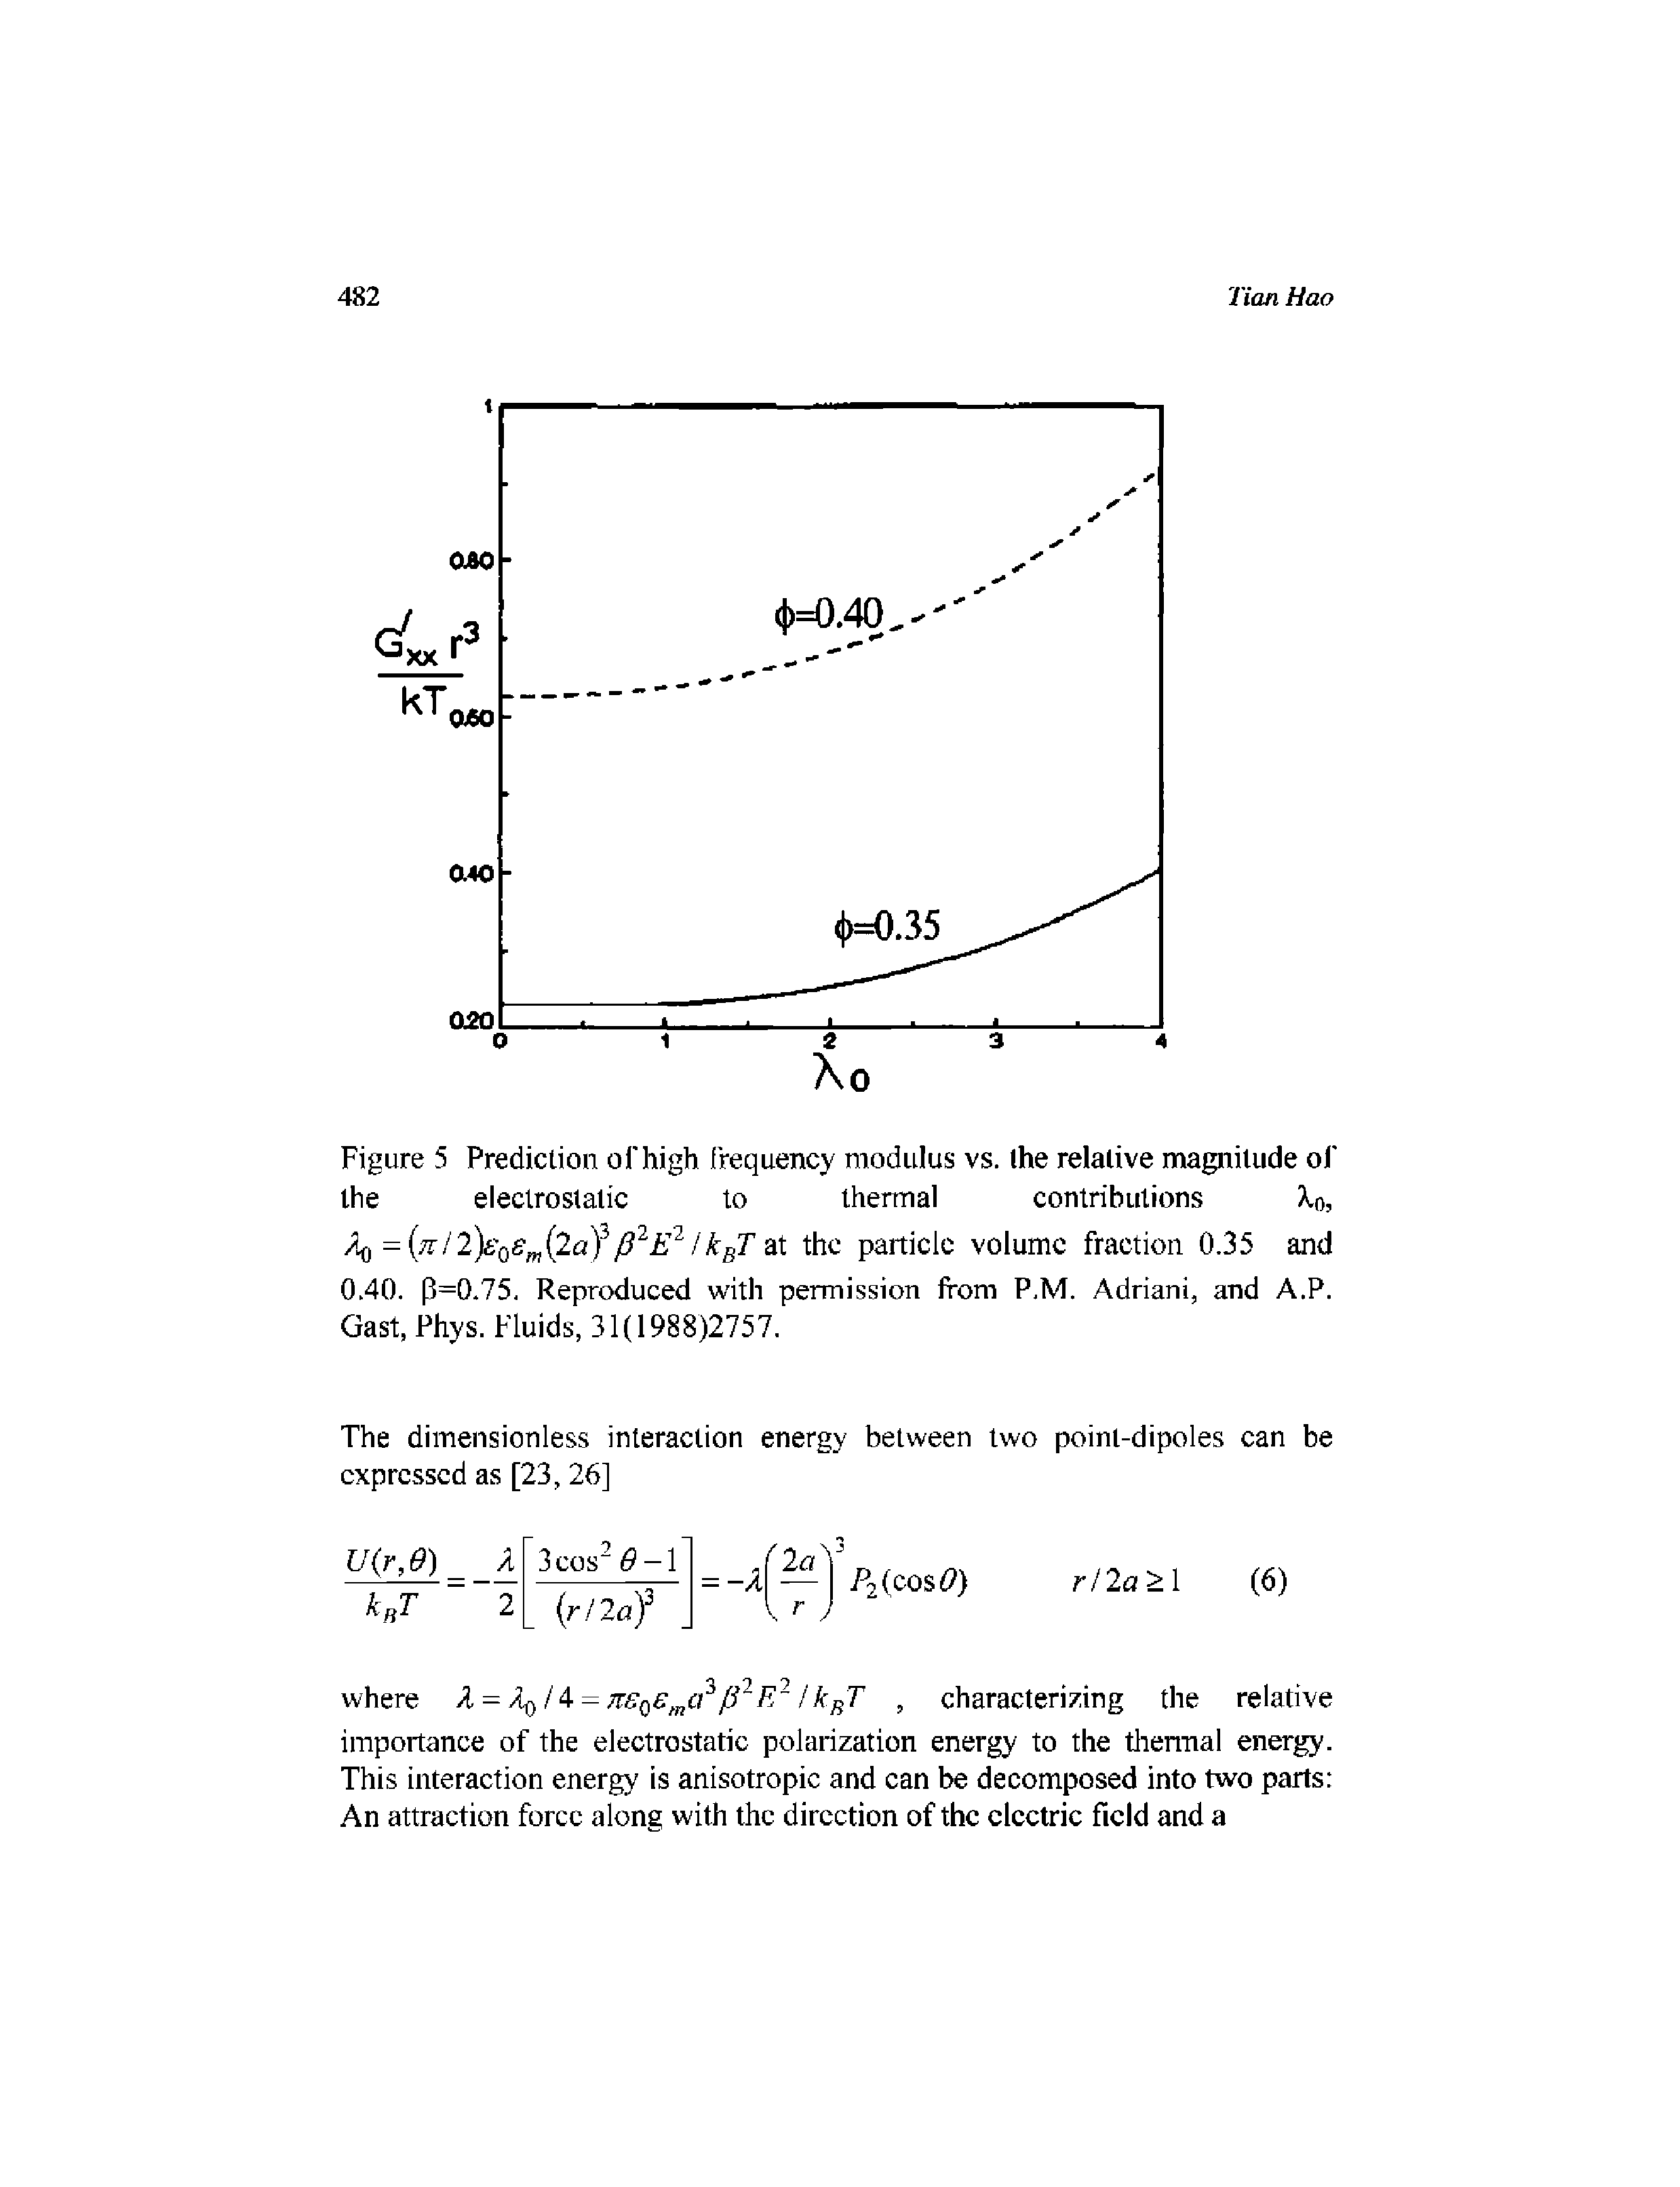 Figure 5 Prediction of high frequency modulus vs. (he relative magnitude of the electrostatic to thermal contributions Xn, Af)- 7il2)eQS 2af/kgT at the particle volume fraction 0.35 and 0-40. p=0.75. Reproduced with permission from P.M. Adriani, and A.P. Gast, Phys. Fluids, 31(1988)2757.